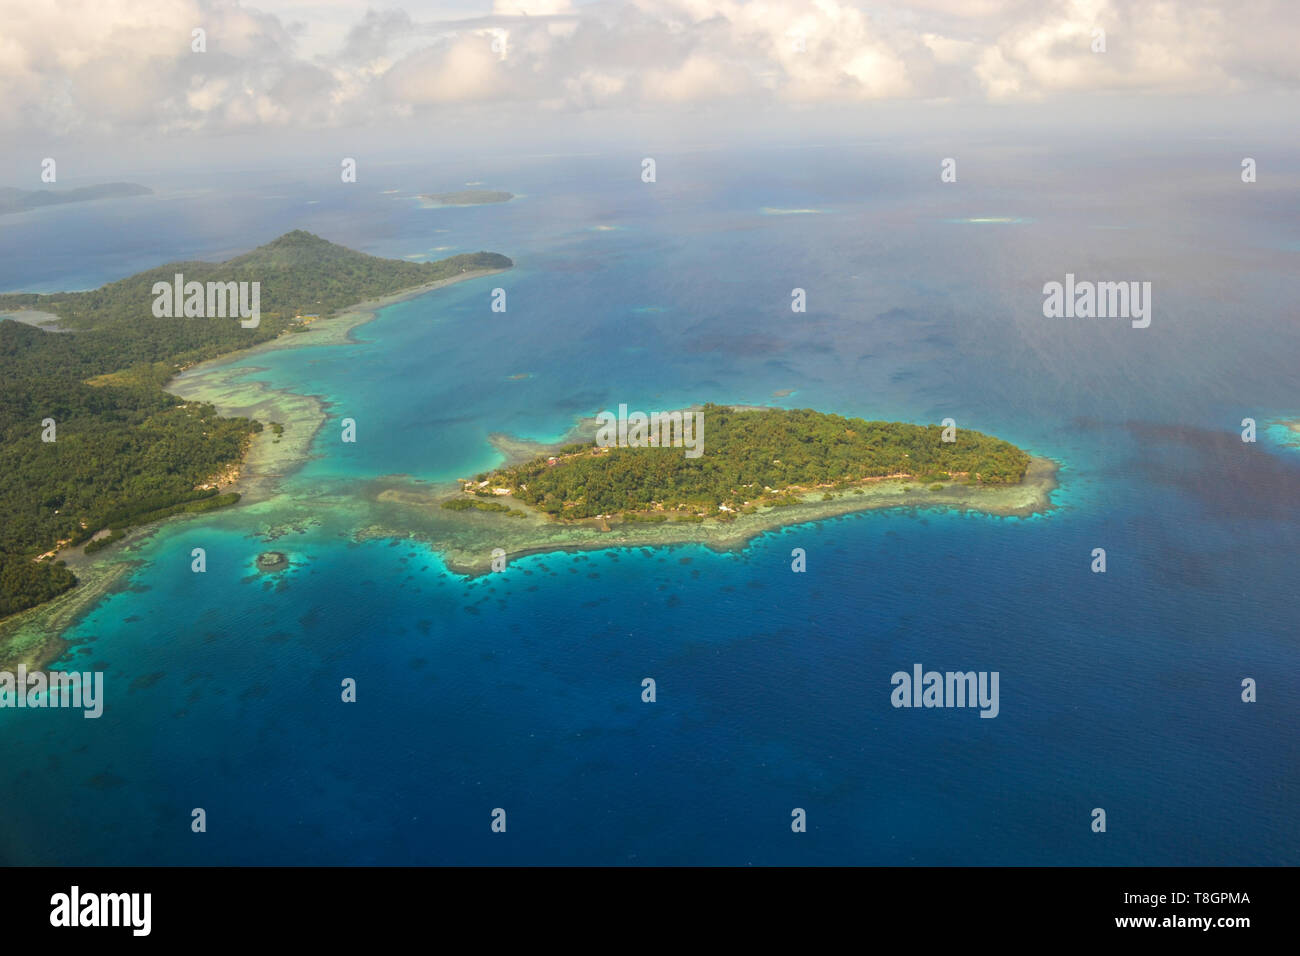 Aerial view of Chuuk, Federated States of Micronesia Stock Photo